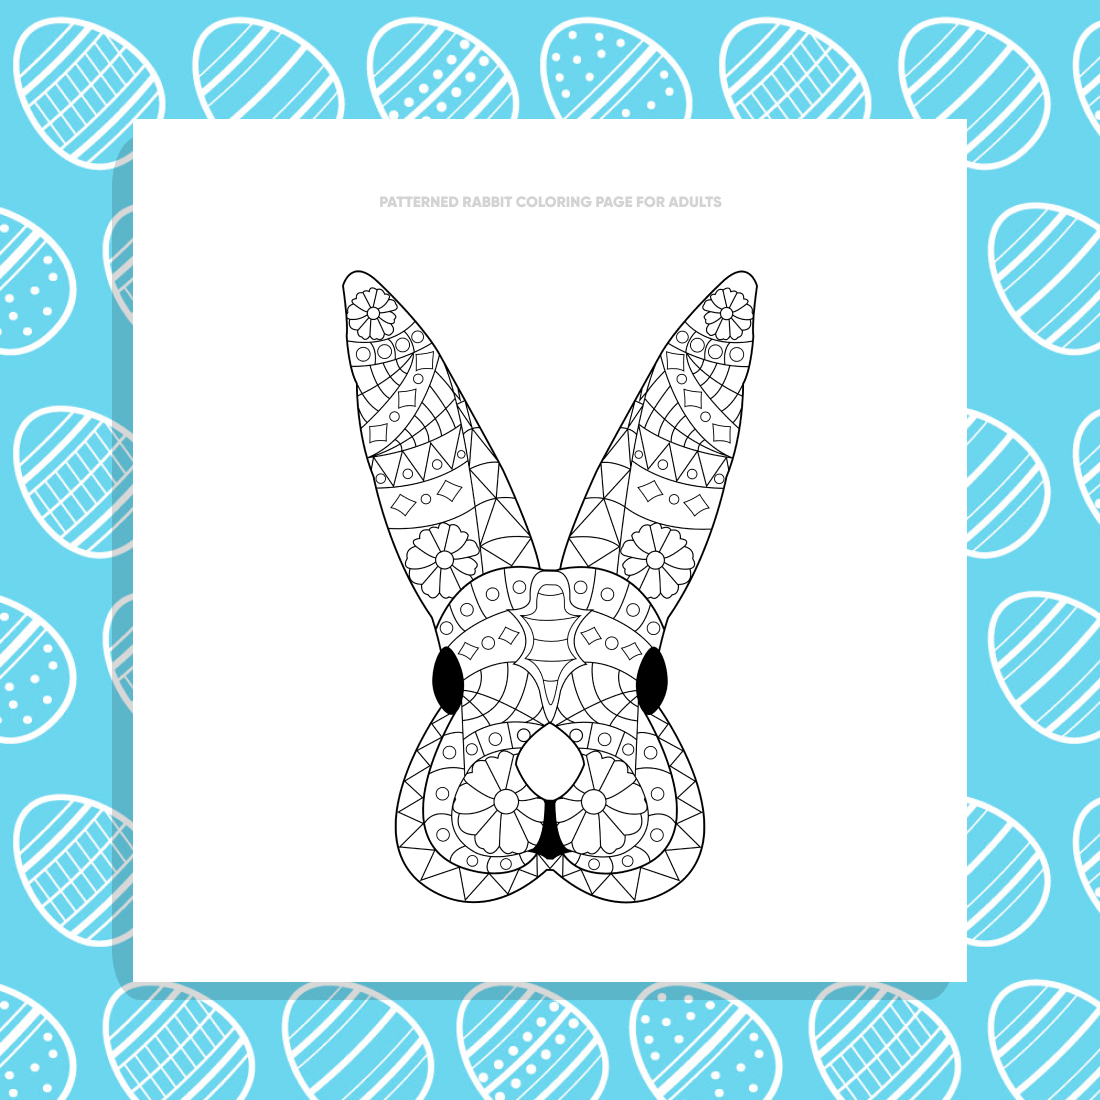 Patterned Rabbit Coloring Page for Adults previews.